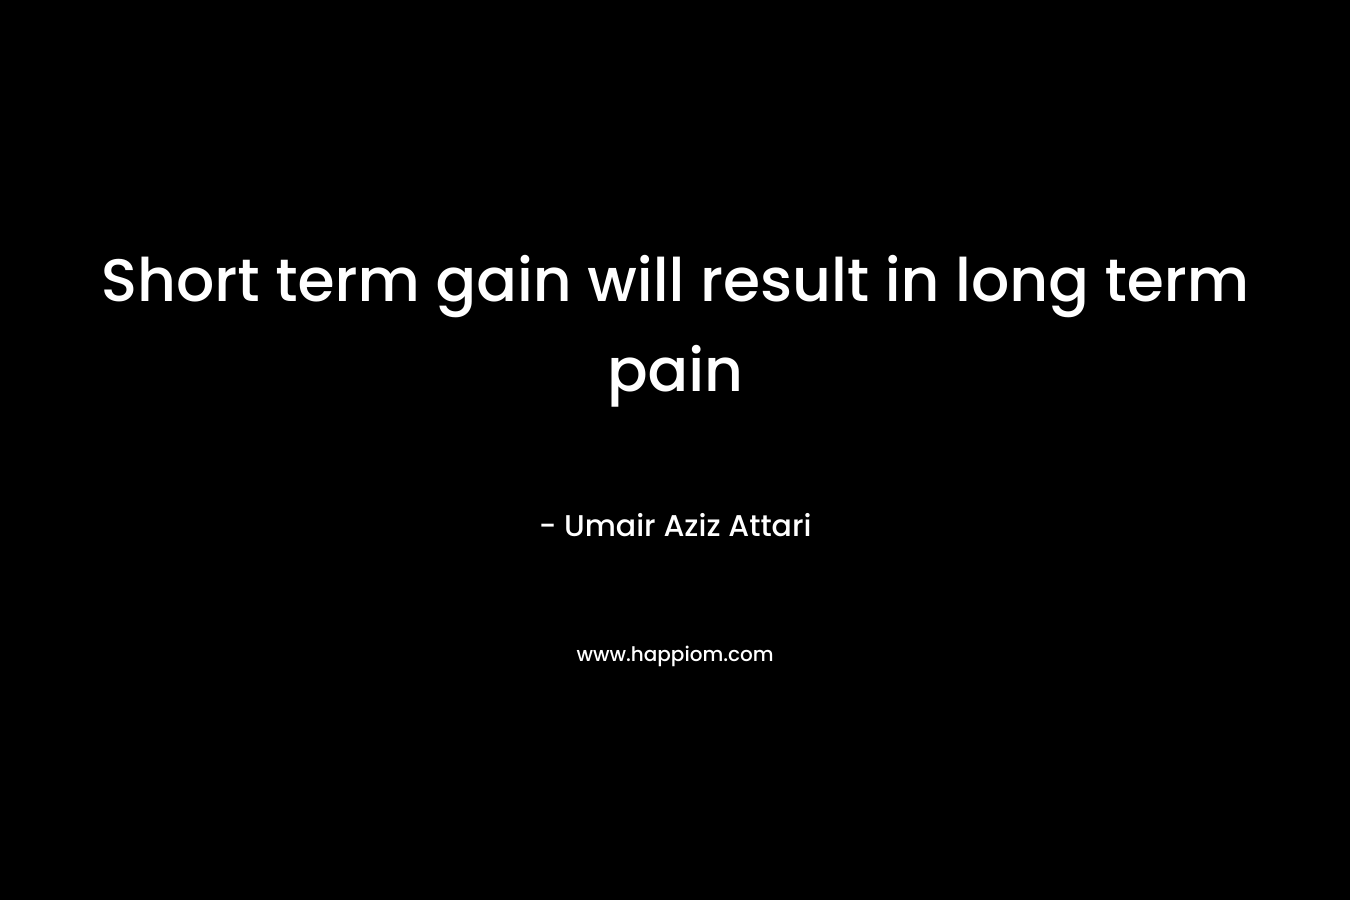 Short term gain will result in long term pain